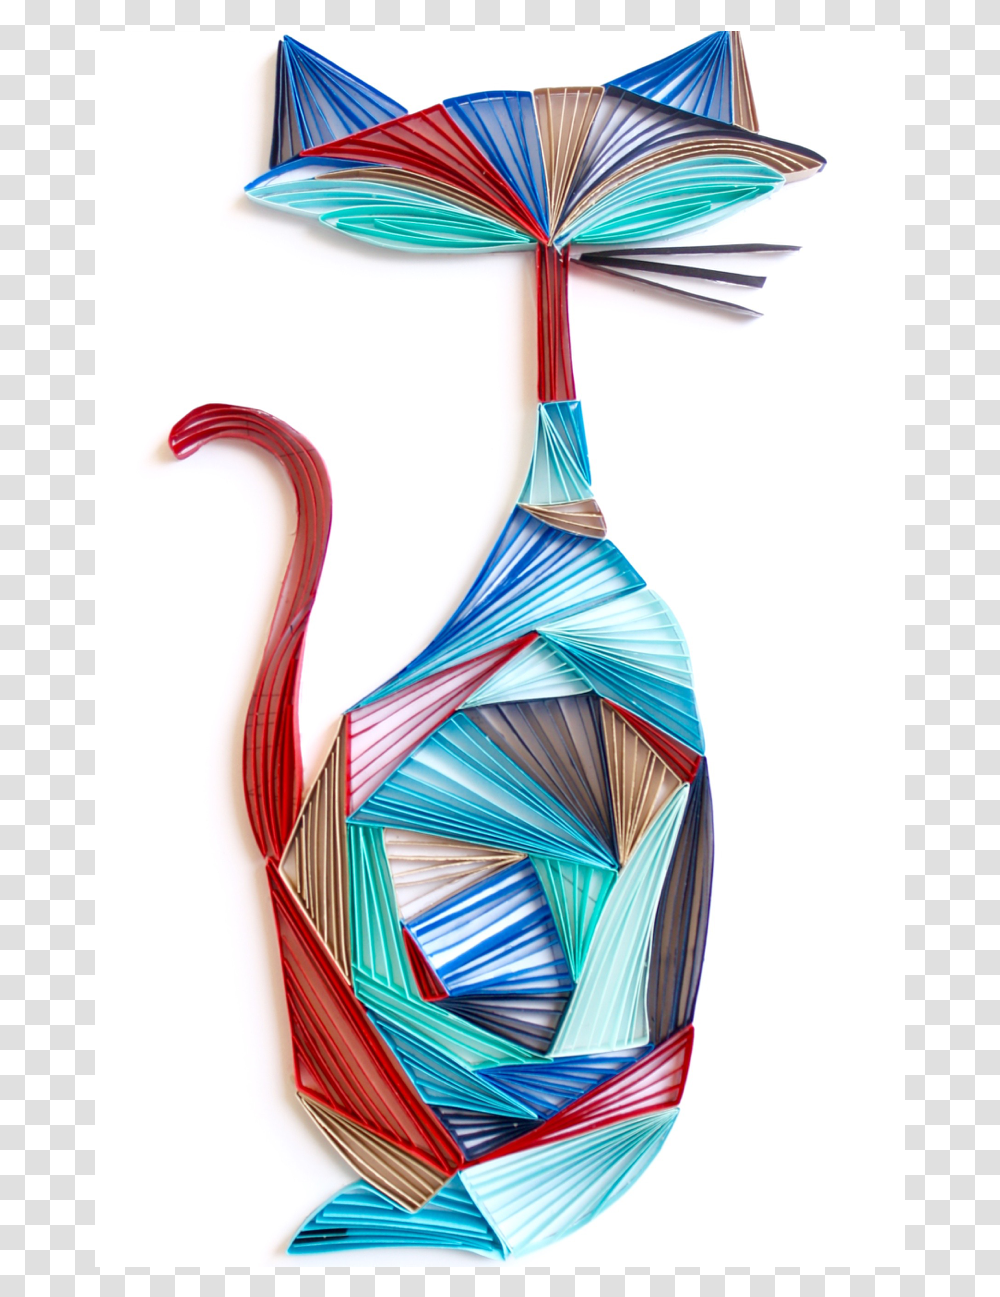 The Cool Cat Illustration, Lamp, Paper, Glass Transparent Png